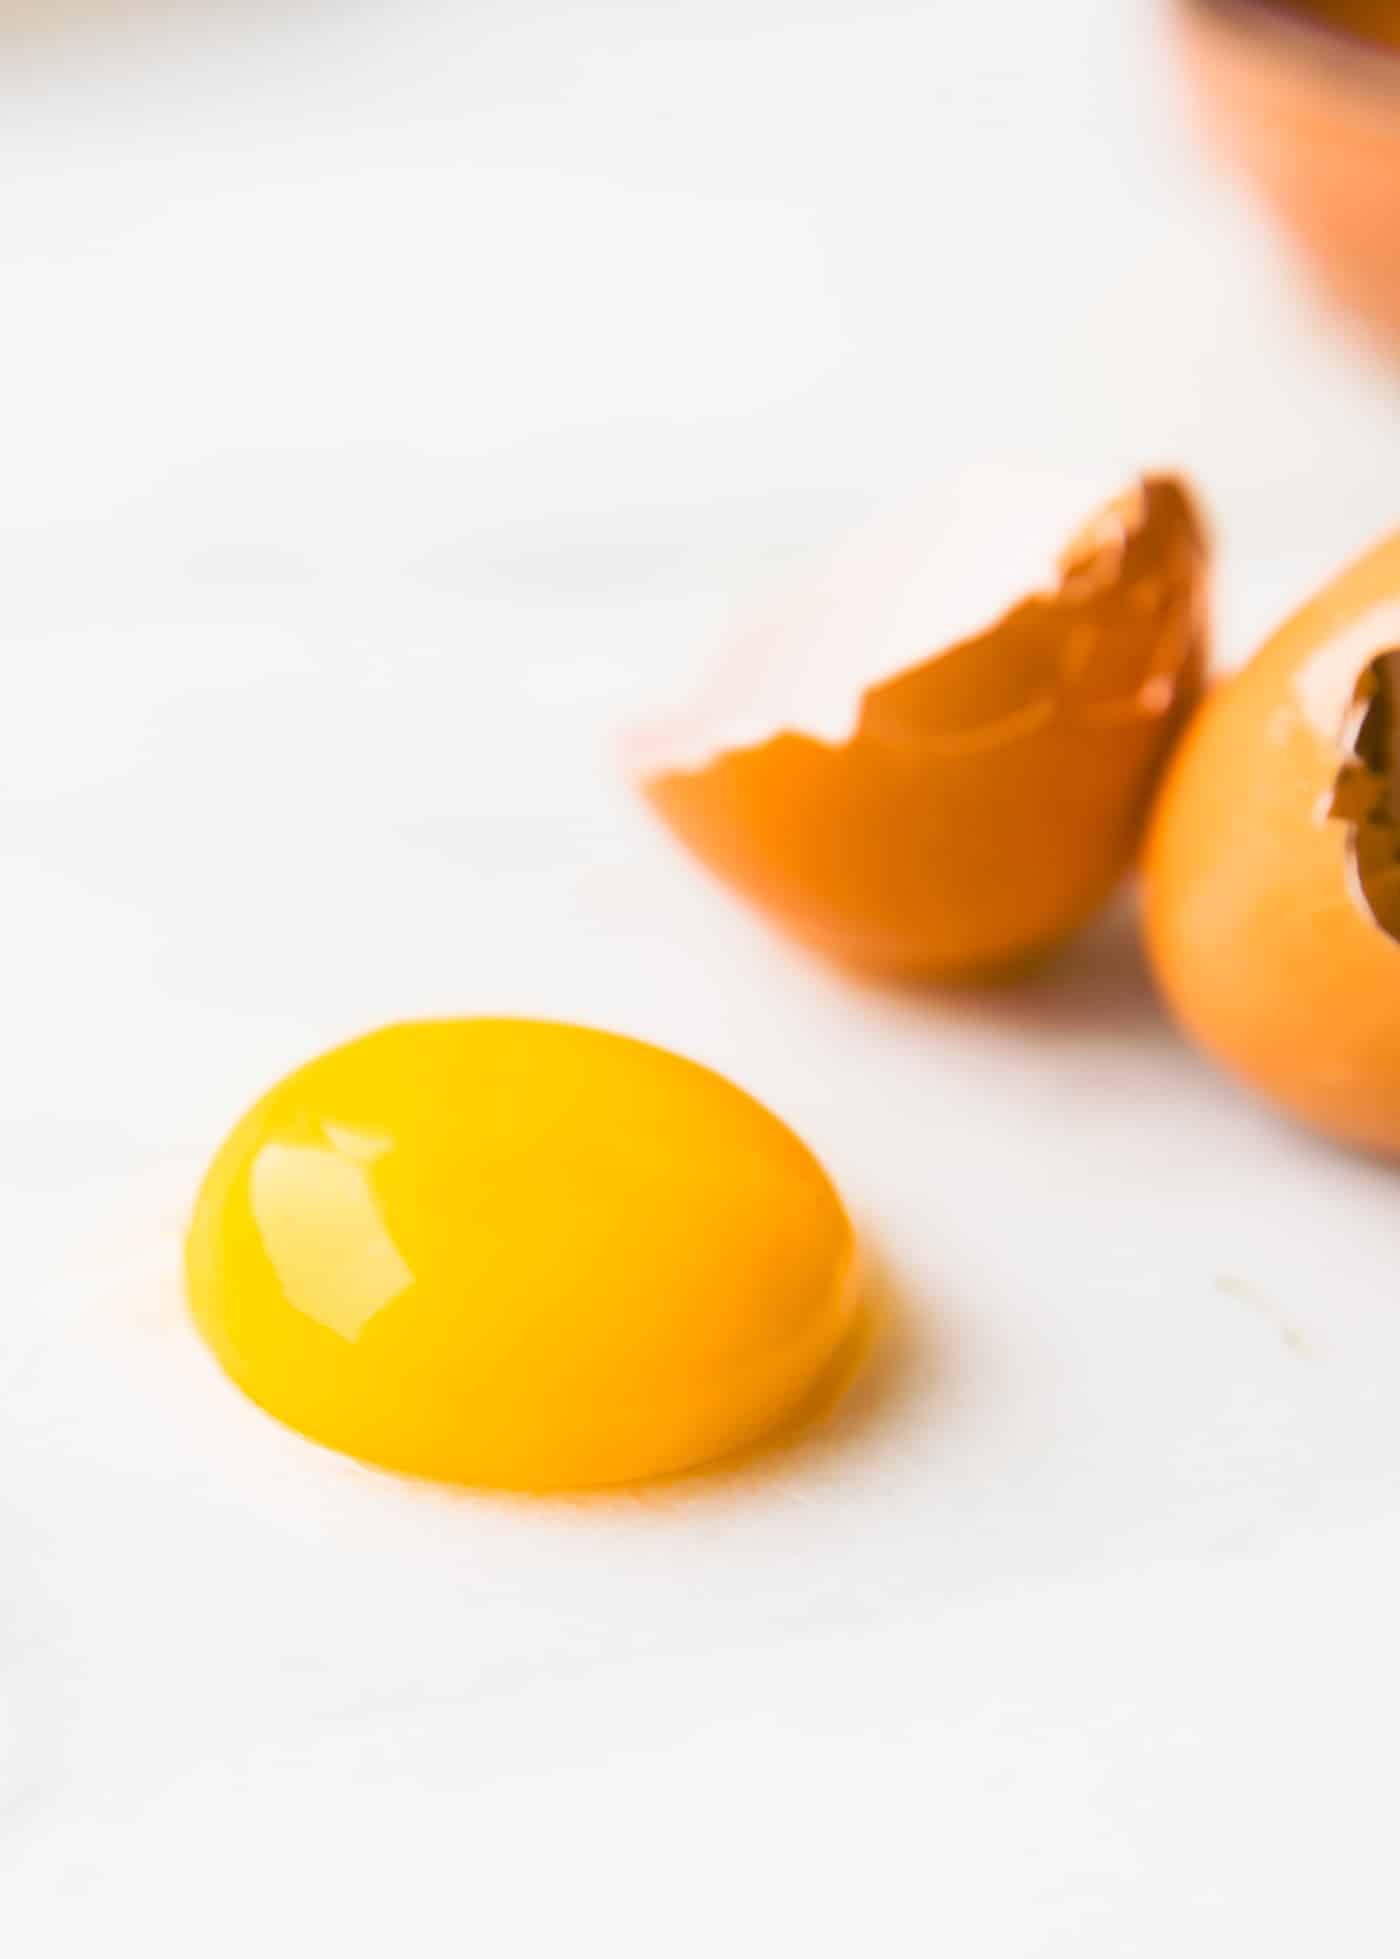 An egg yolk on white counter for homemade chipotle mayo